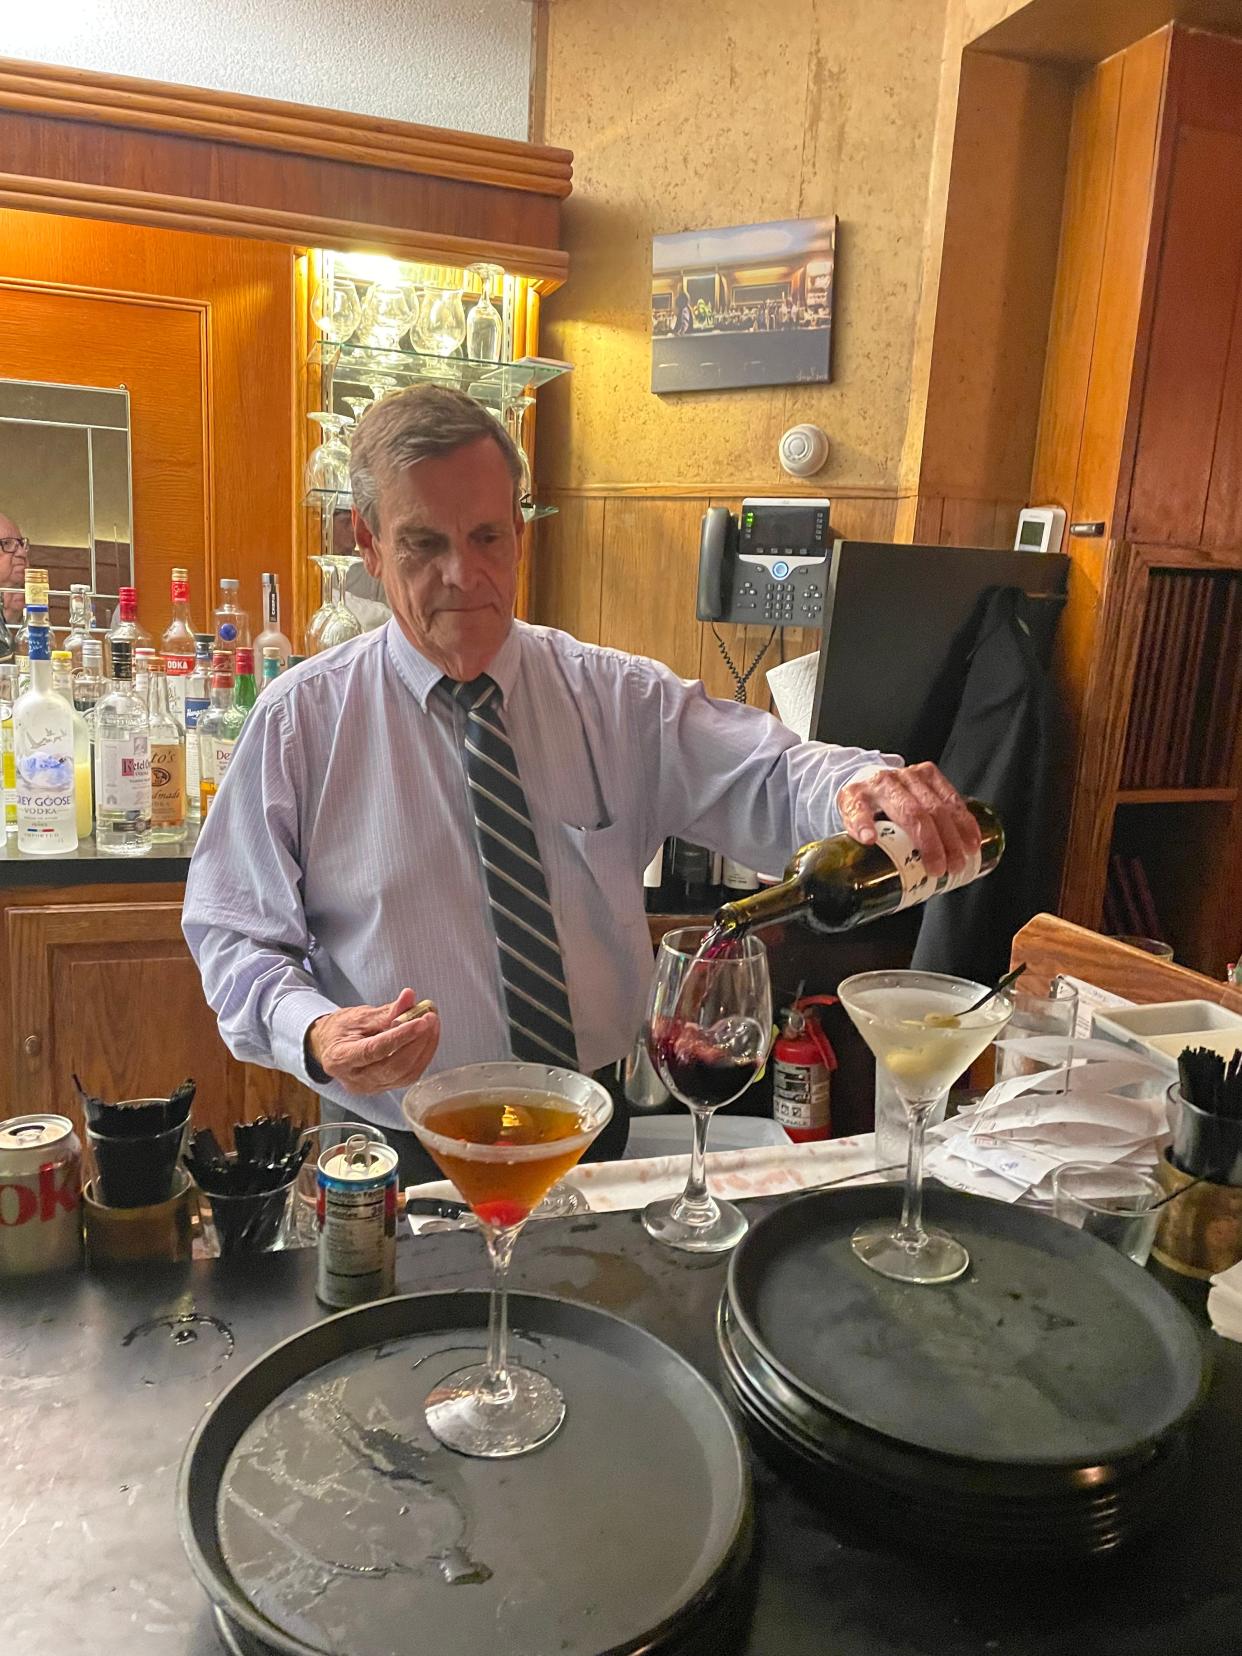 Bartender Larry Thomas has been a bartender at Akron's Diamond Grille for 50 years.
(Credit: Craig Webb, Akron Beacon Journal)